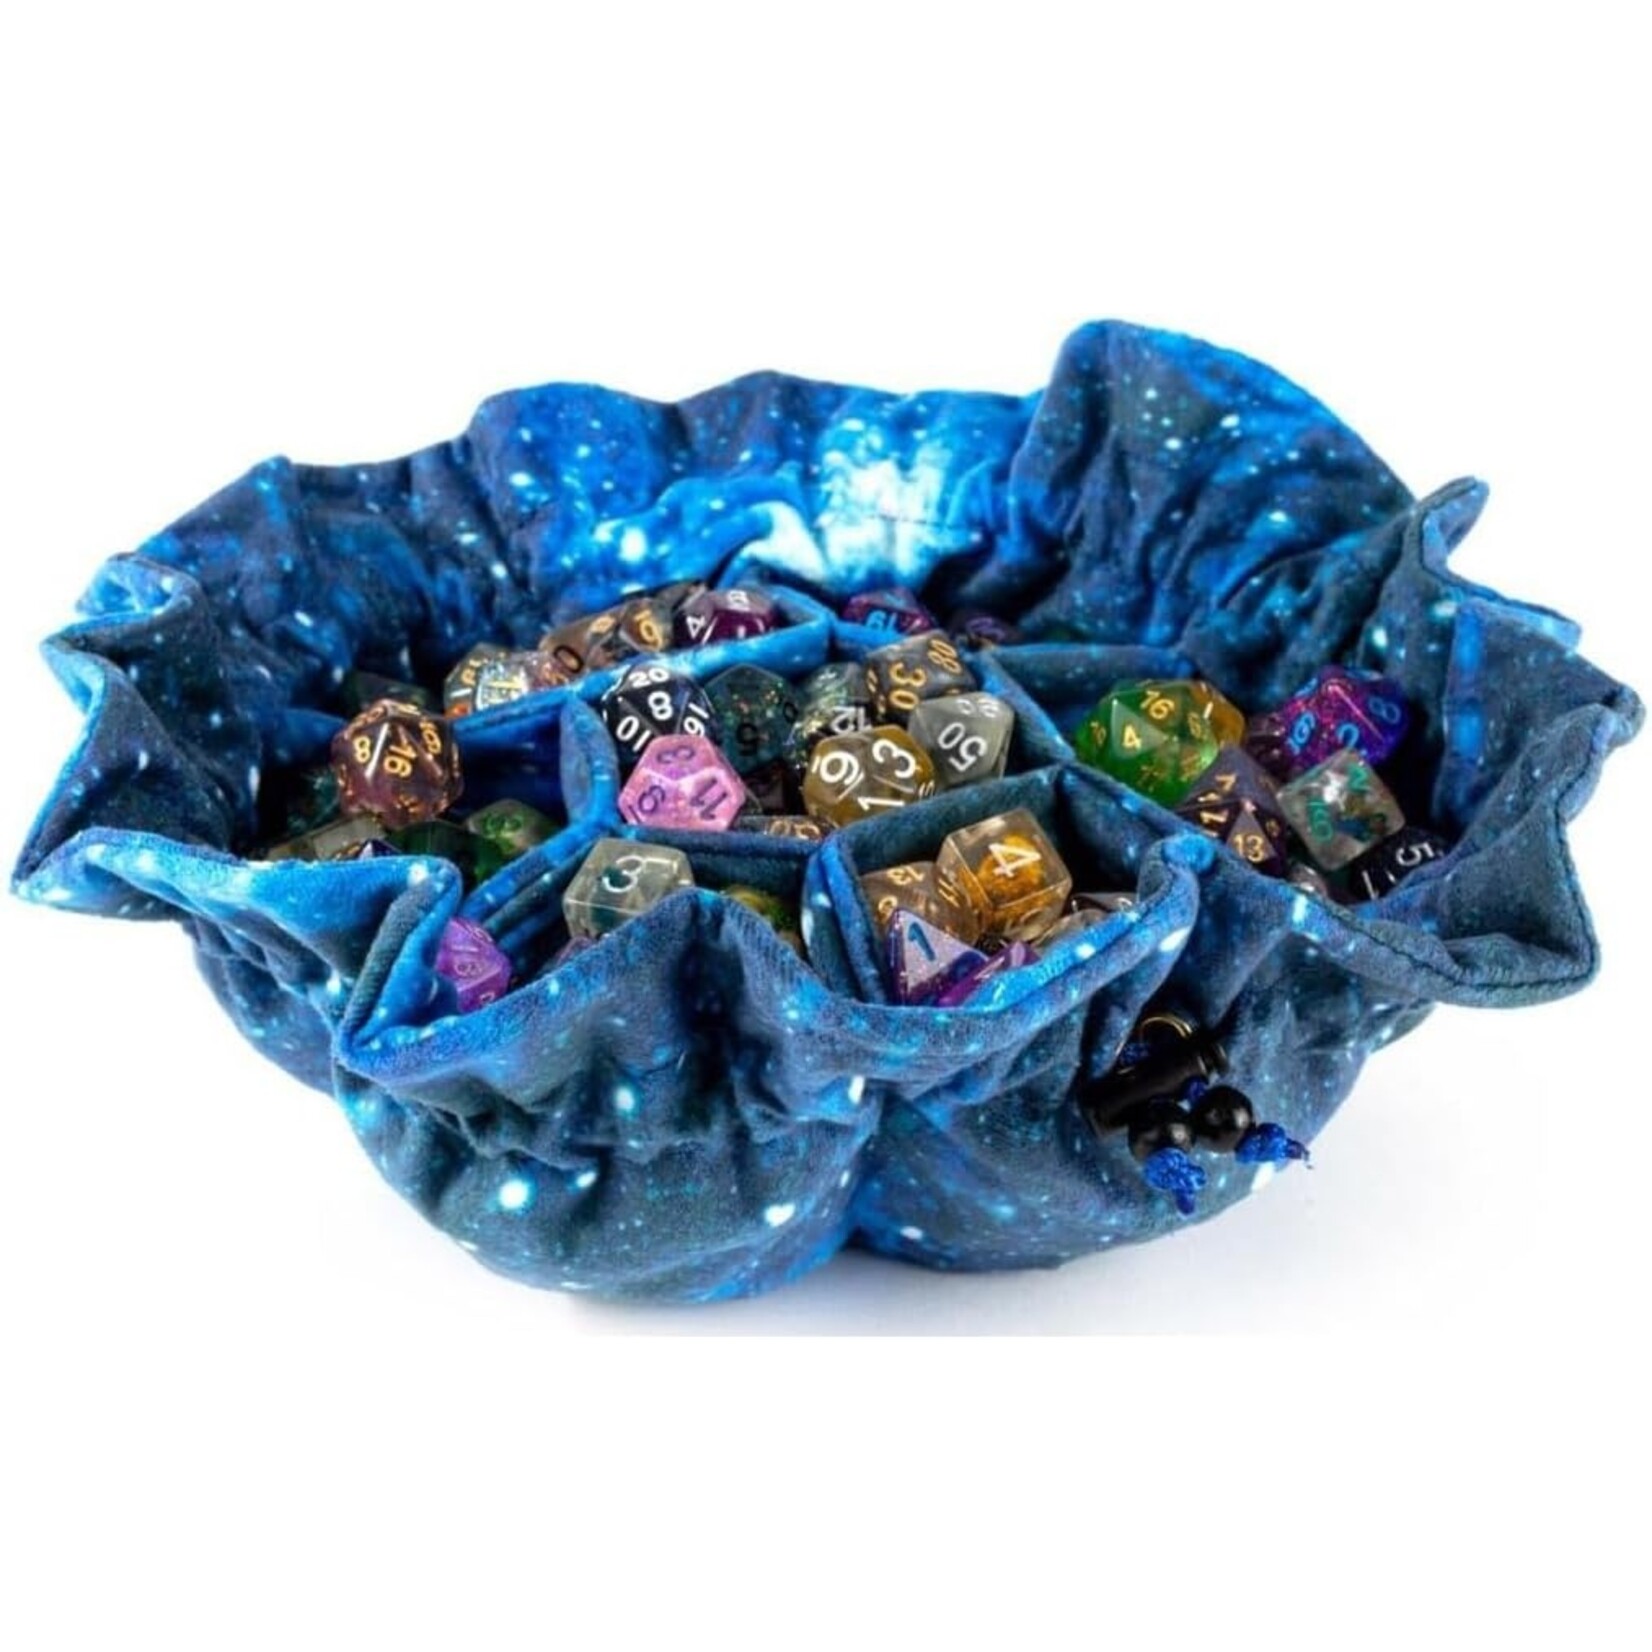 Fanroll Galaxy: Velvet Compartment Dice Bag with Pockets